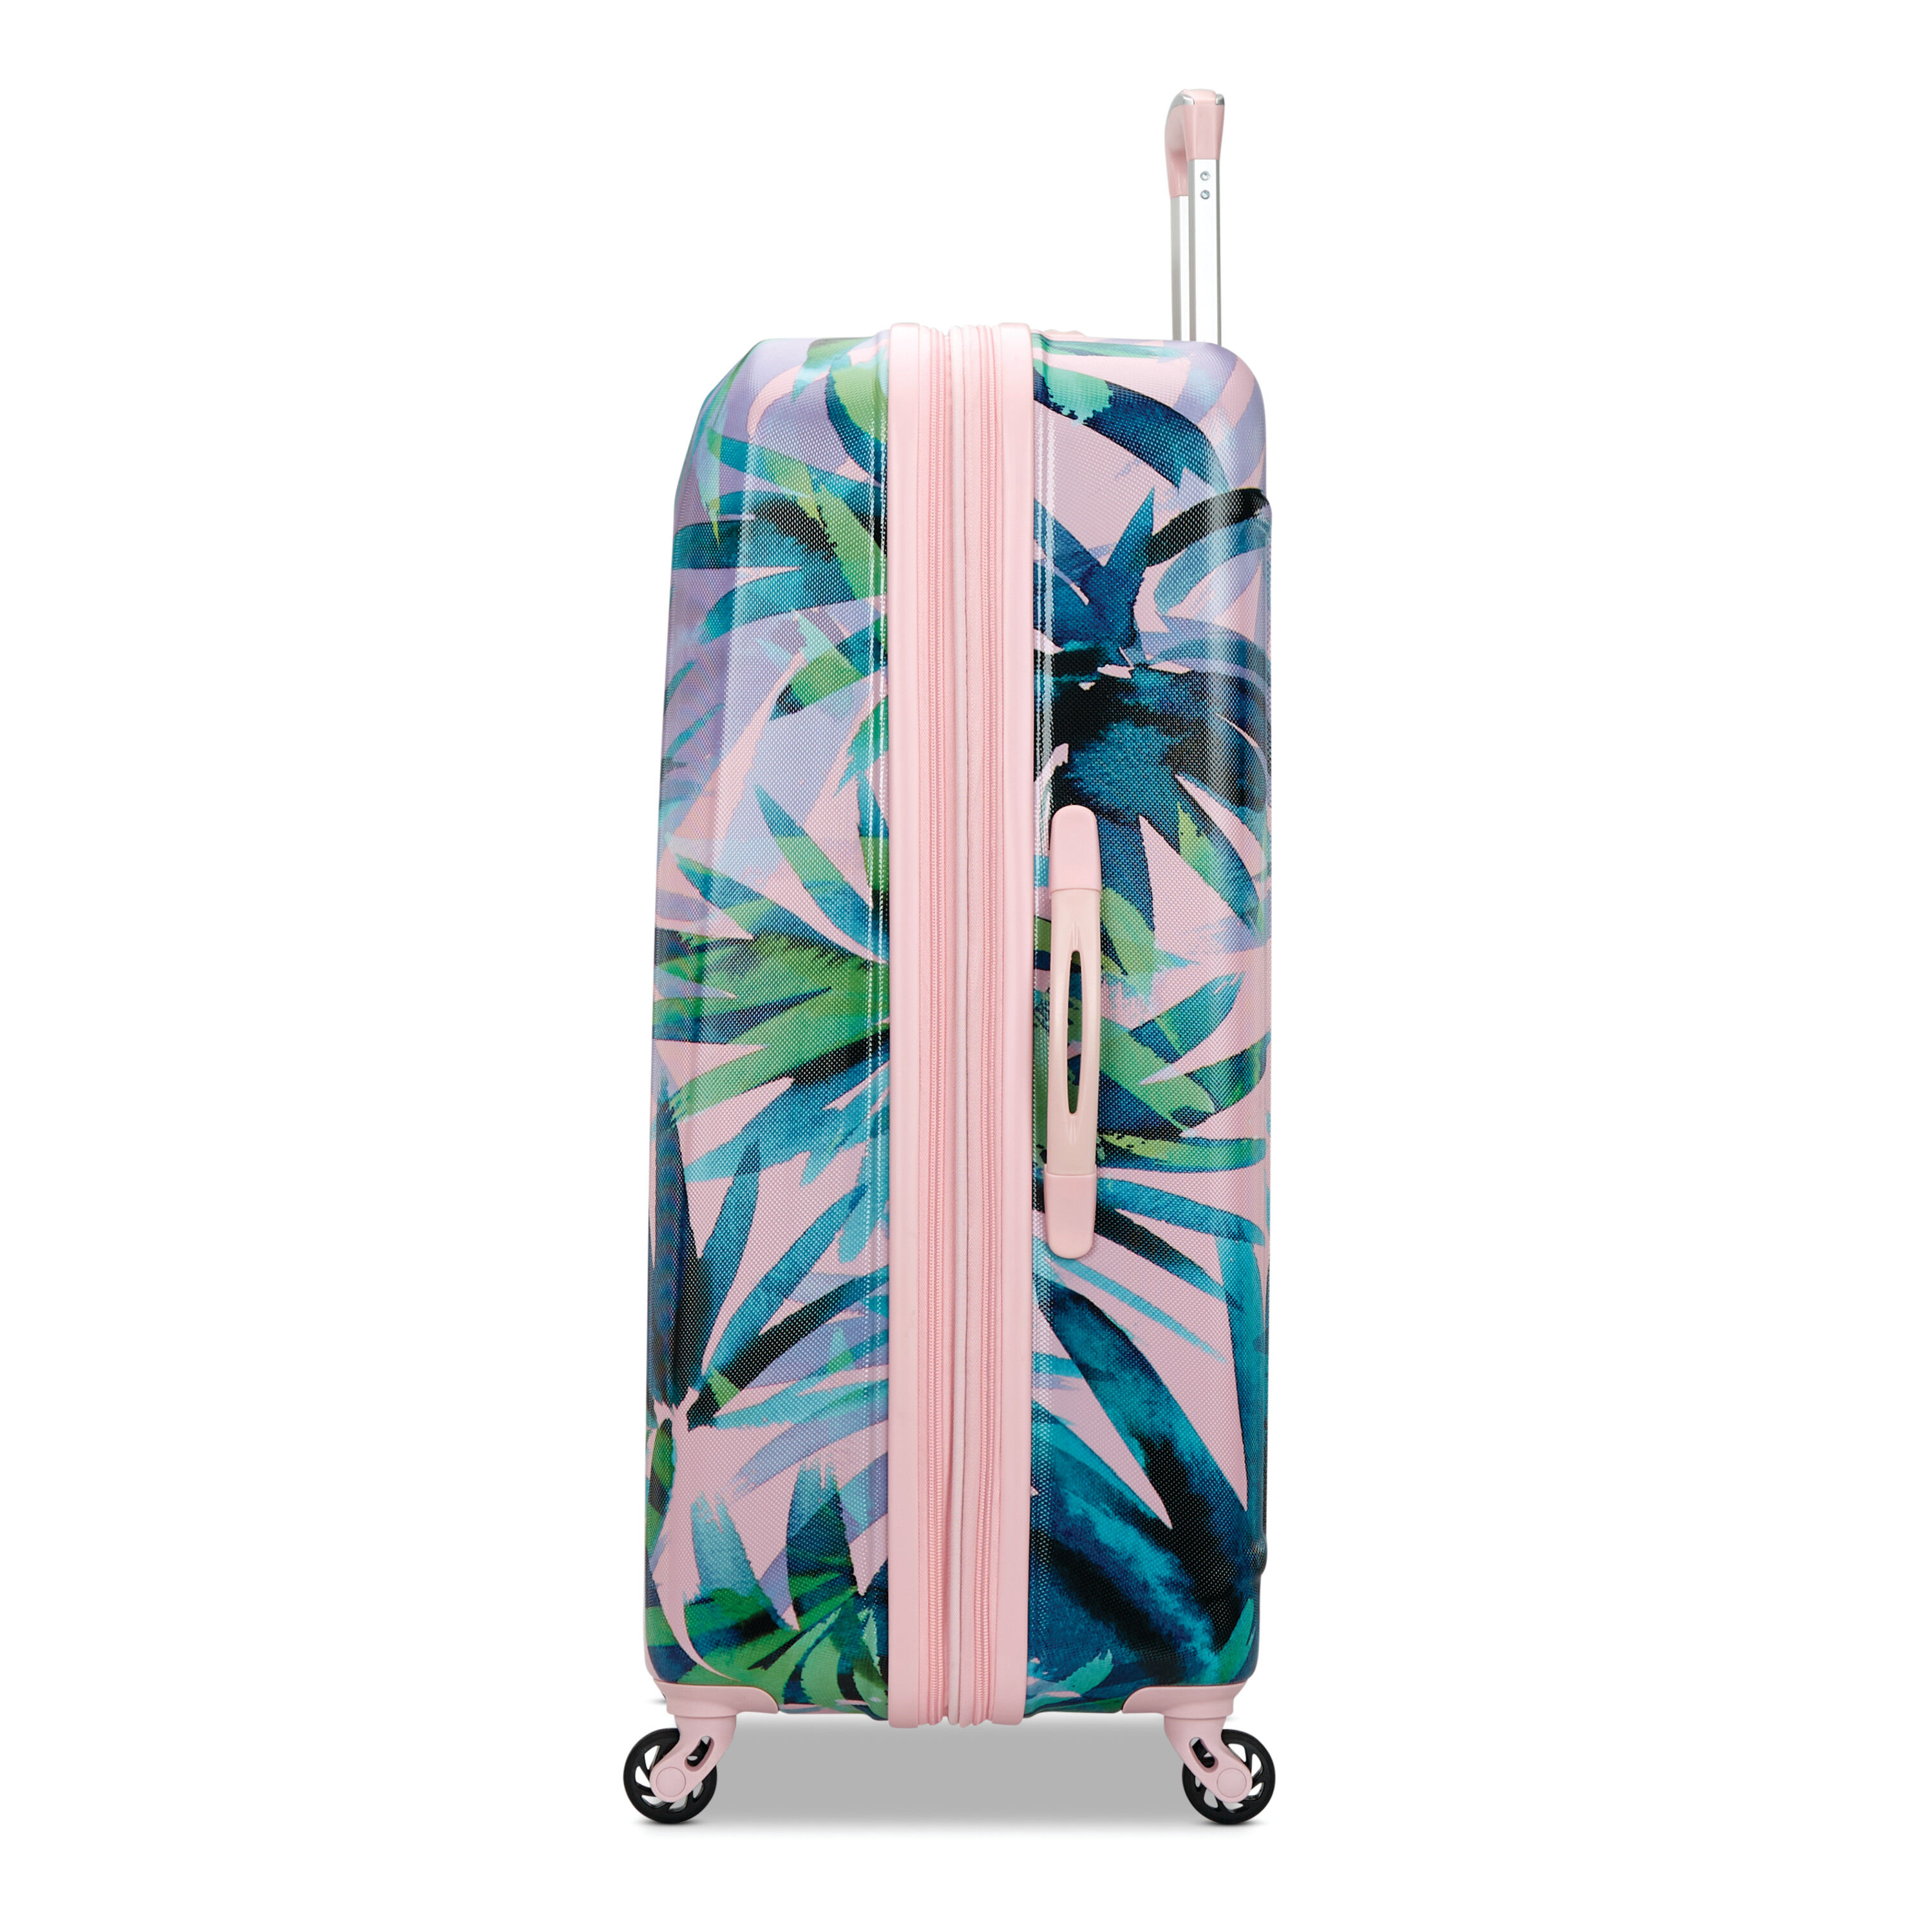 New American Tourister Bag Combo » Buy online from